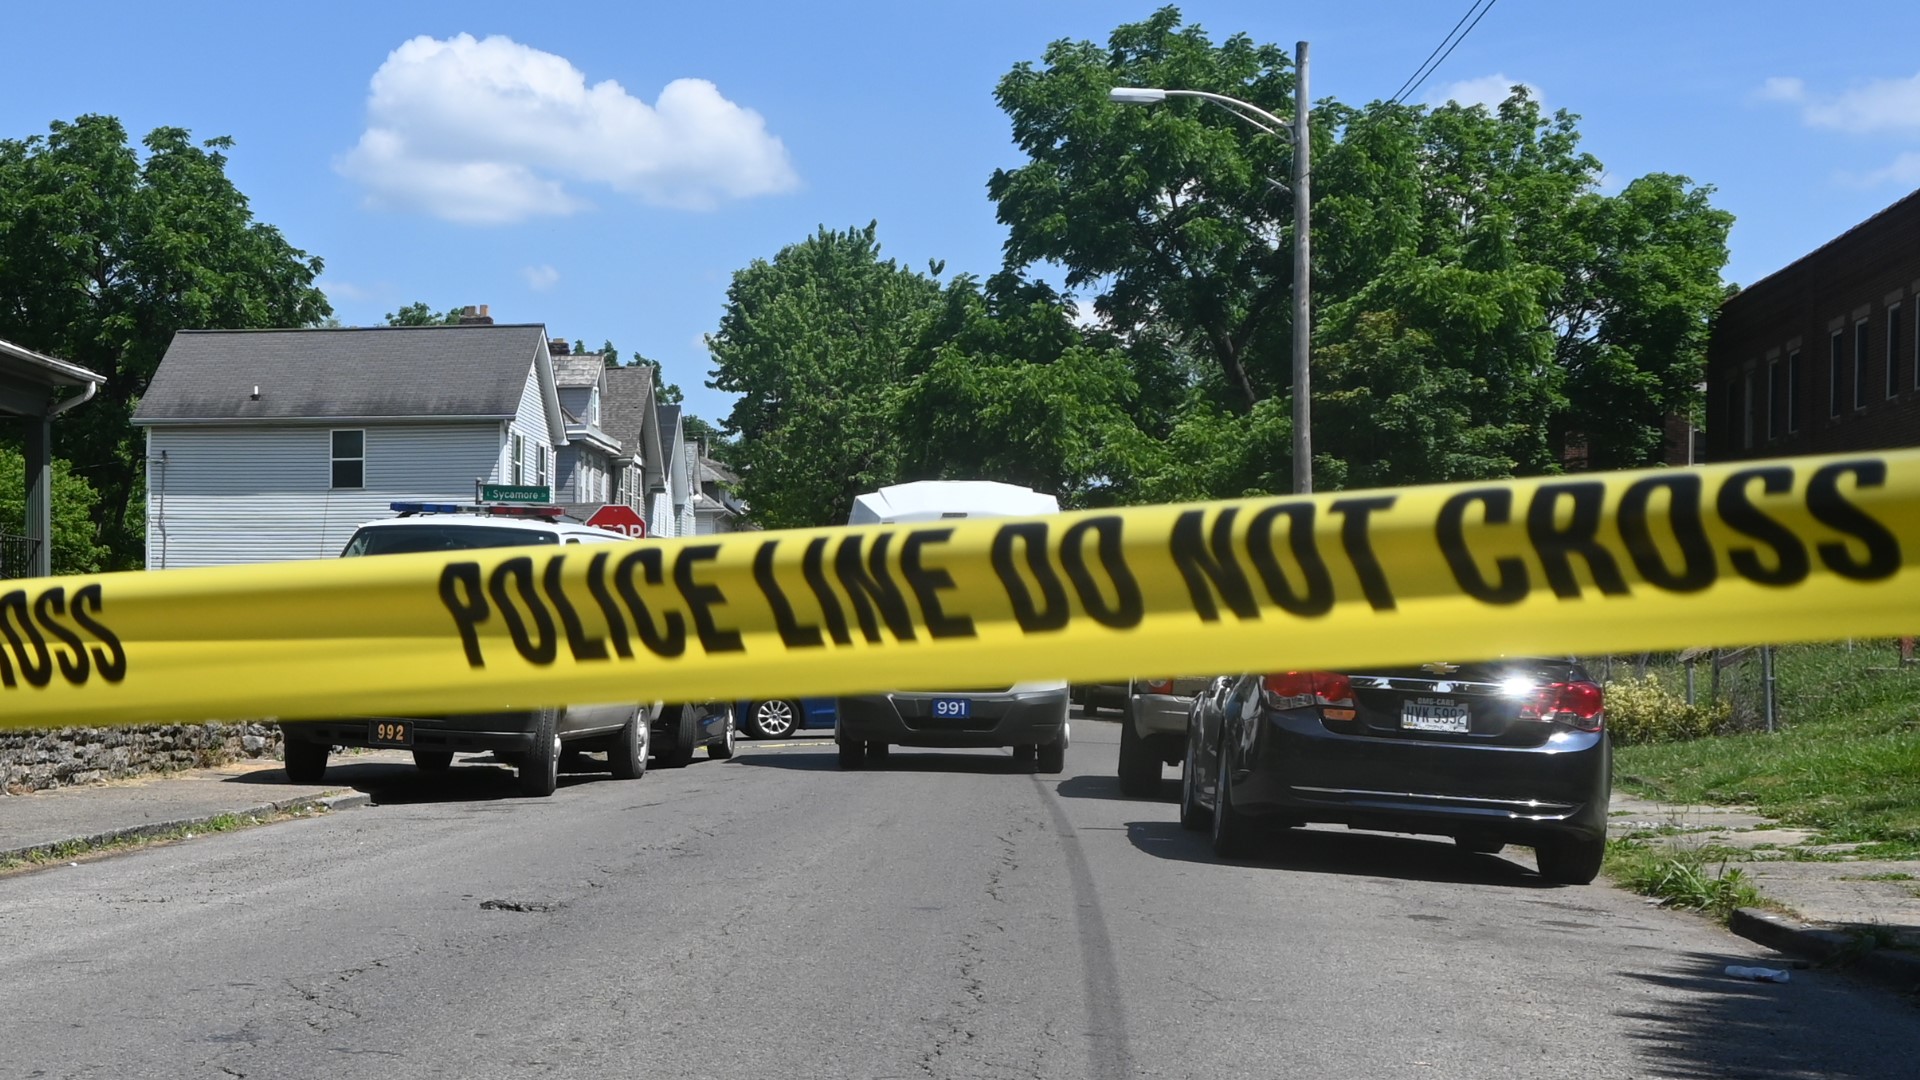 Columbus sees twice as many homicides compared to this time last year